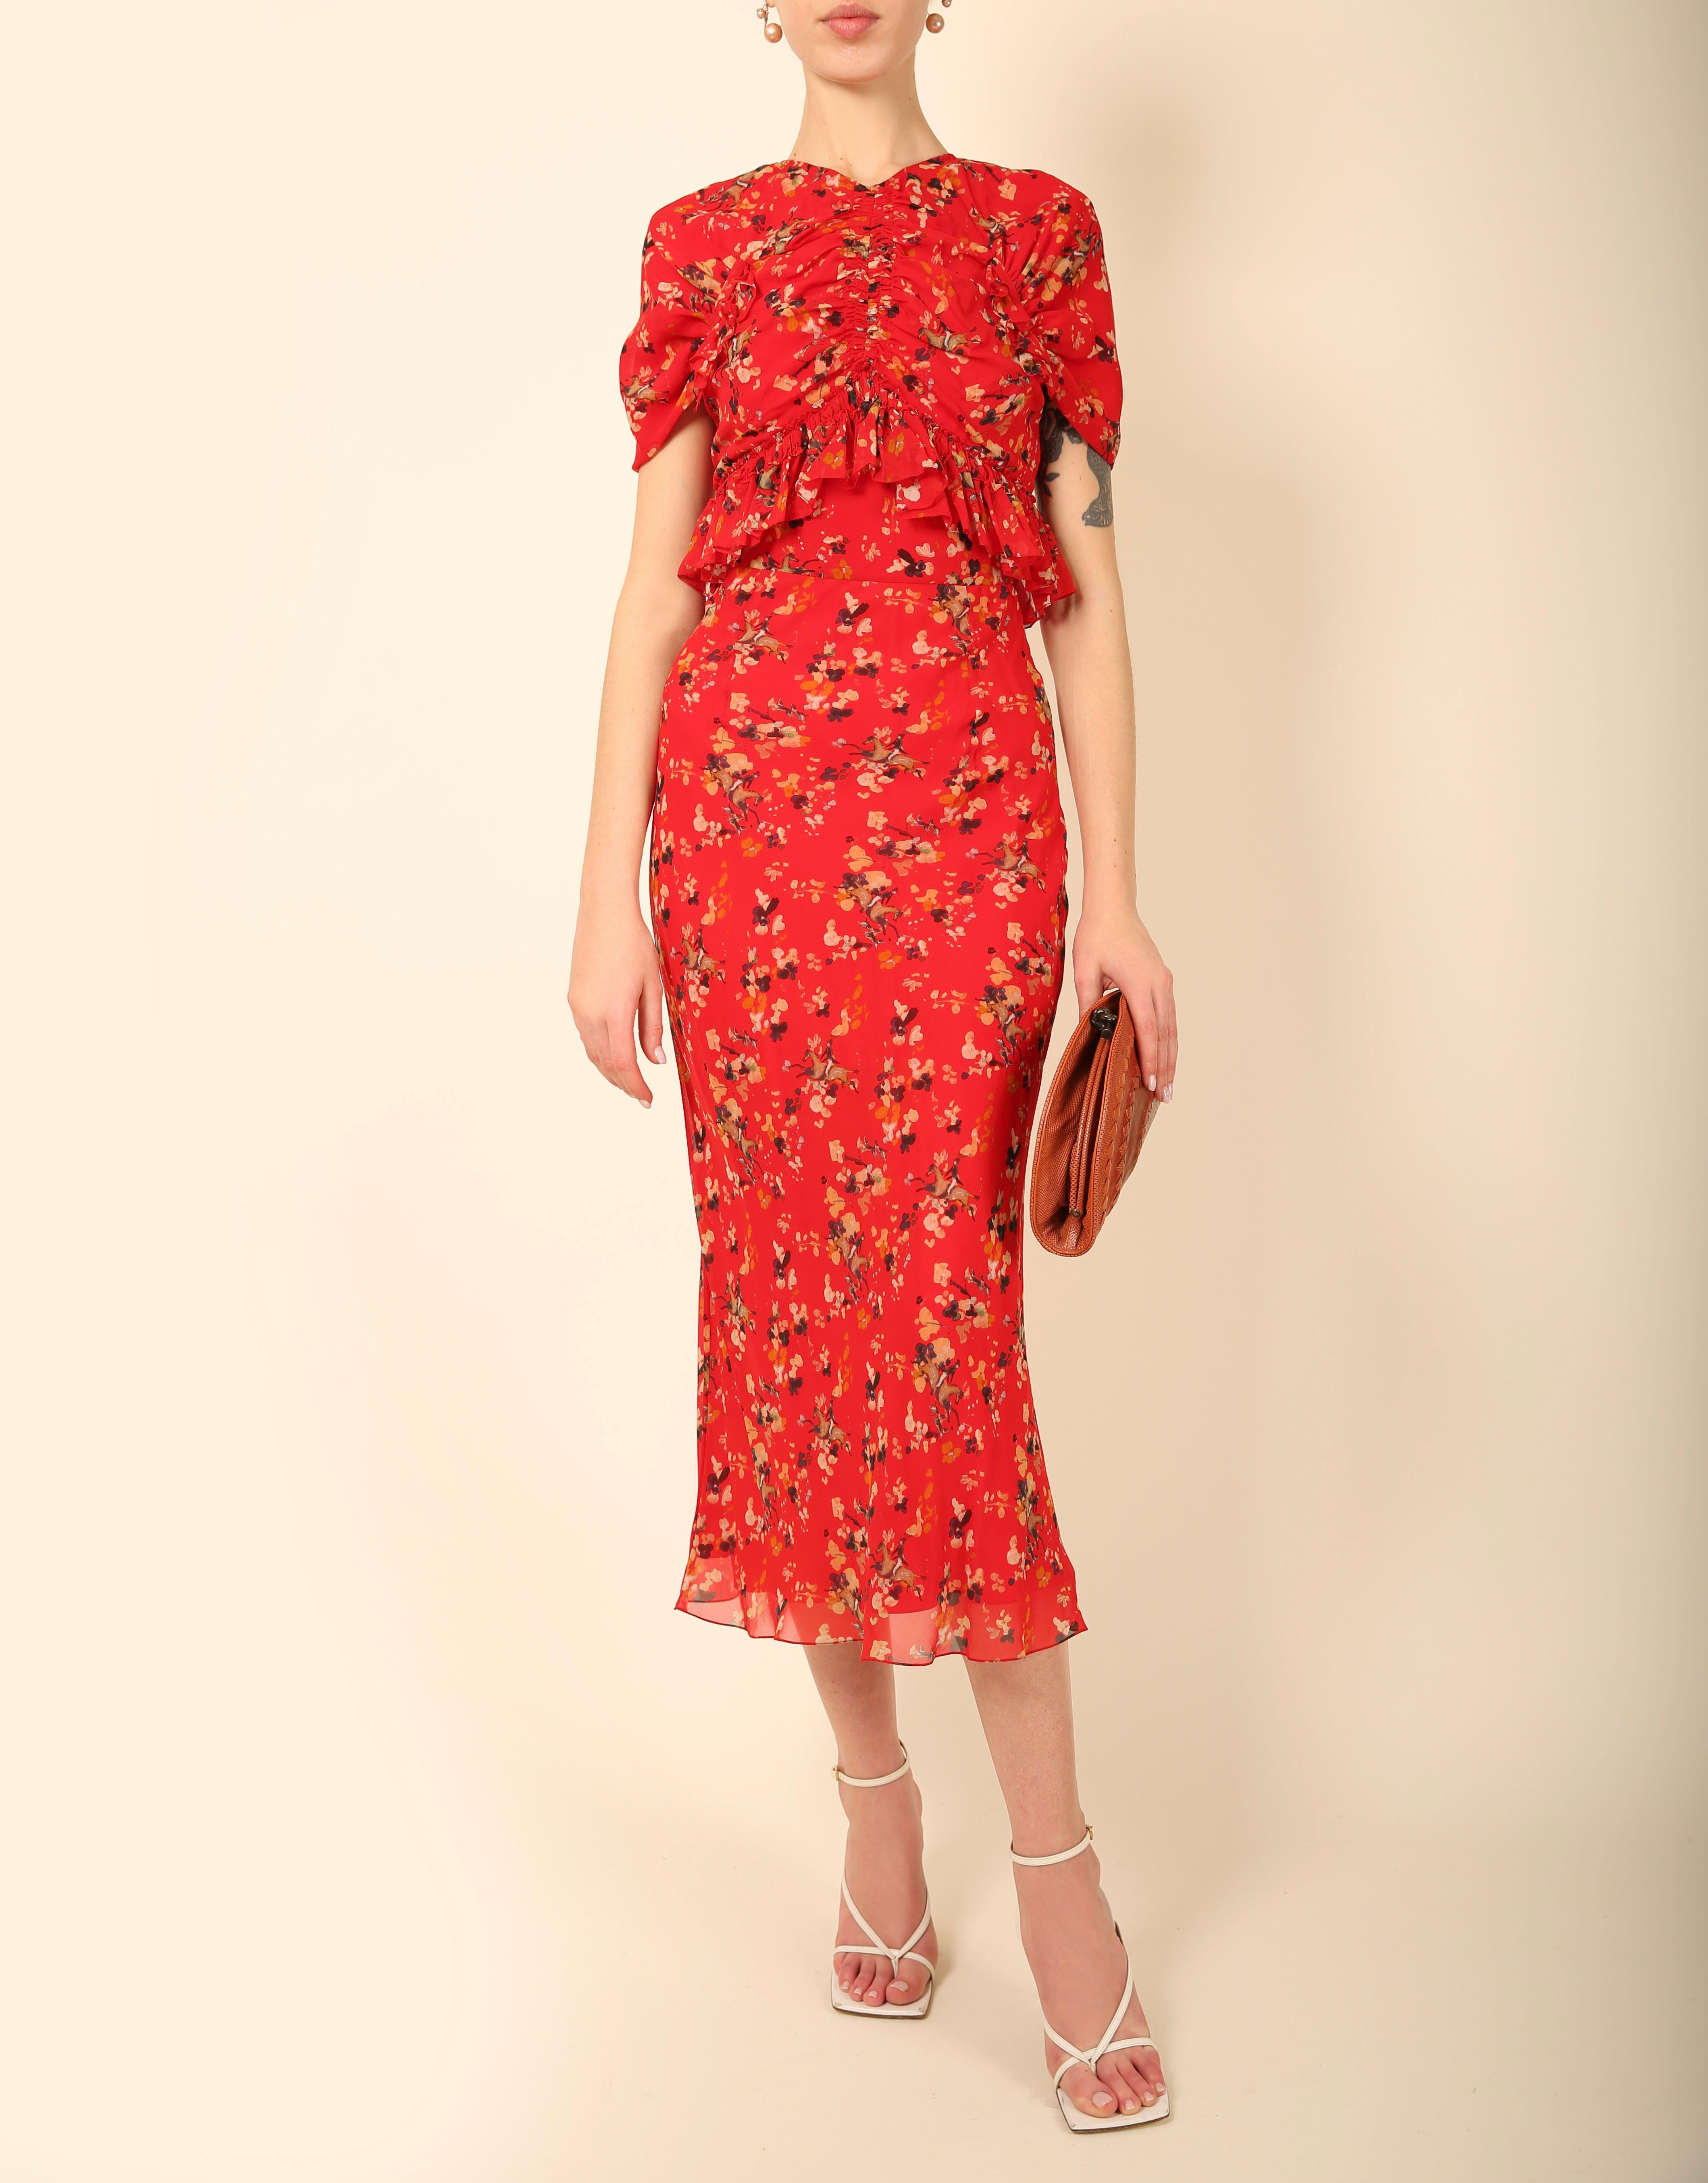 Christian Dior Look 9 from the Resort 2017 runway collection
Short sleeve red dress with floral print in yellow, white and blue
Fitted waist
Double layered skirt
Deep V back
Concealed back zip

Size:
FR 36

Composition:
100% Silk

In excellent